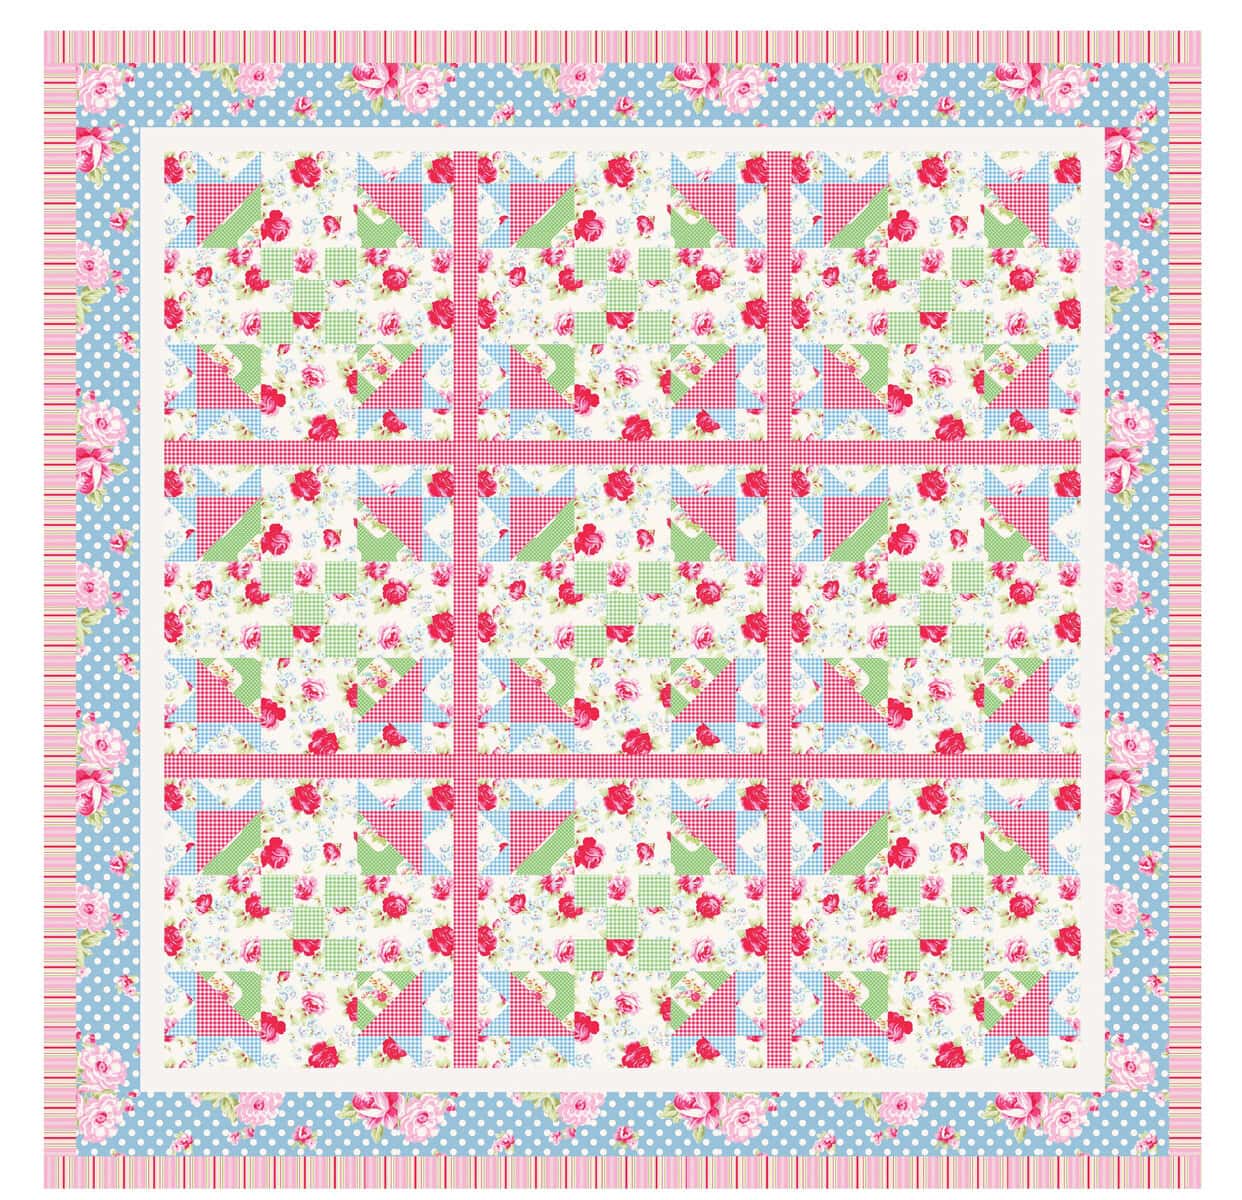 Pattern made in Tanya Whelan's Posie collection